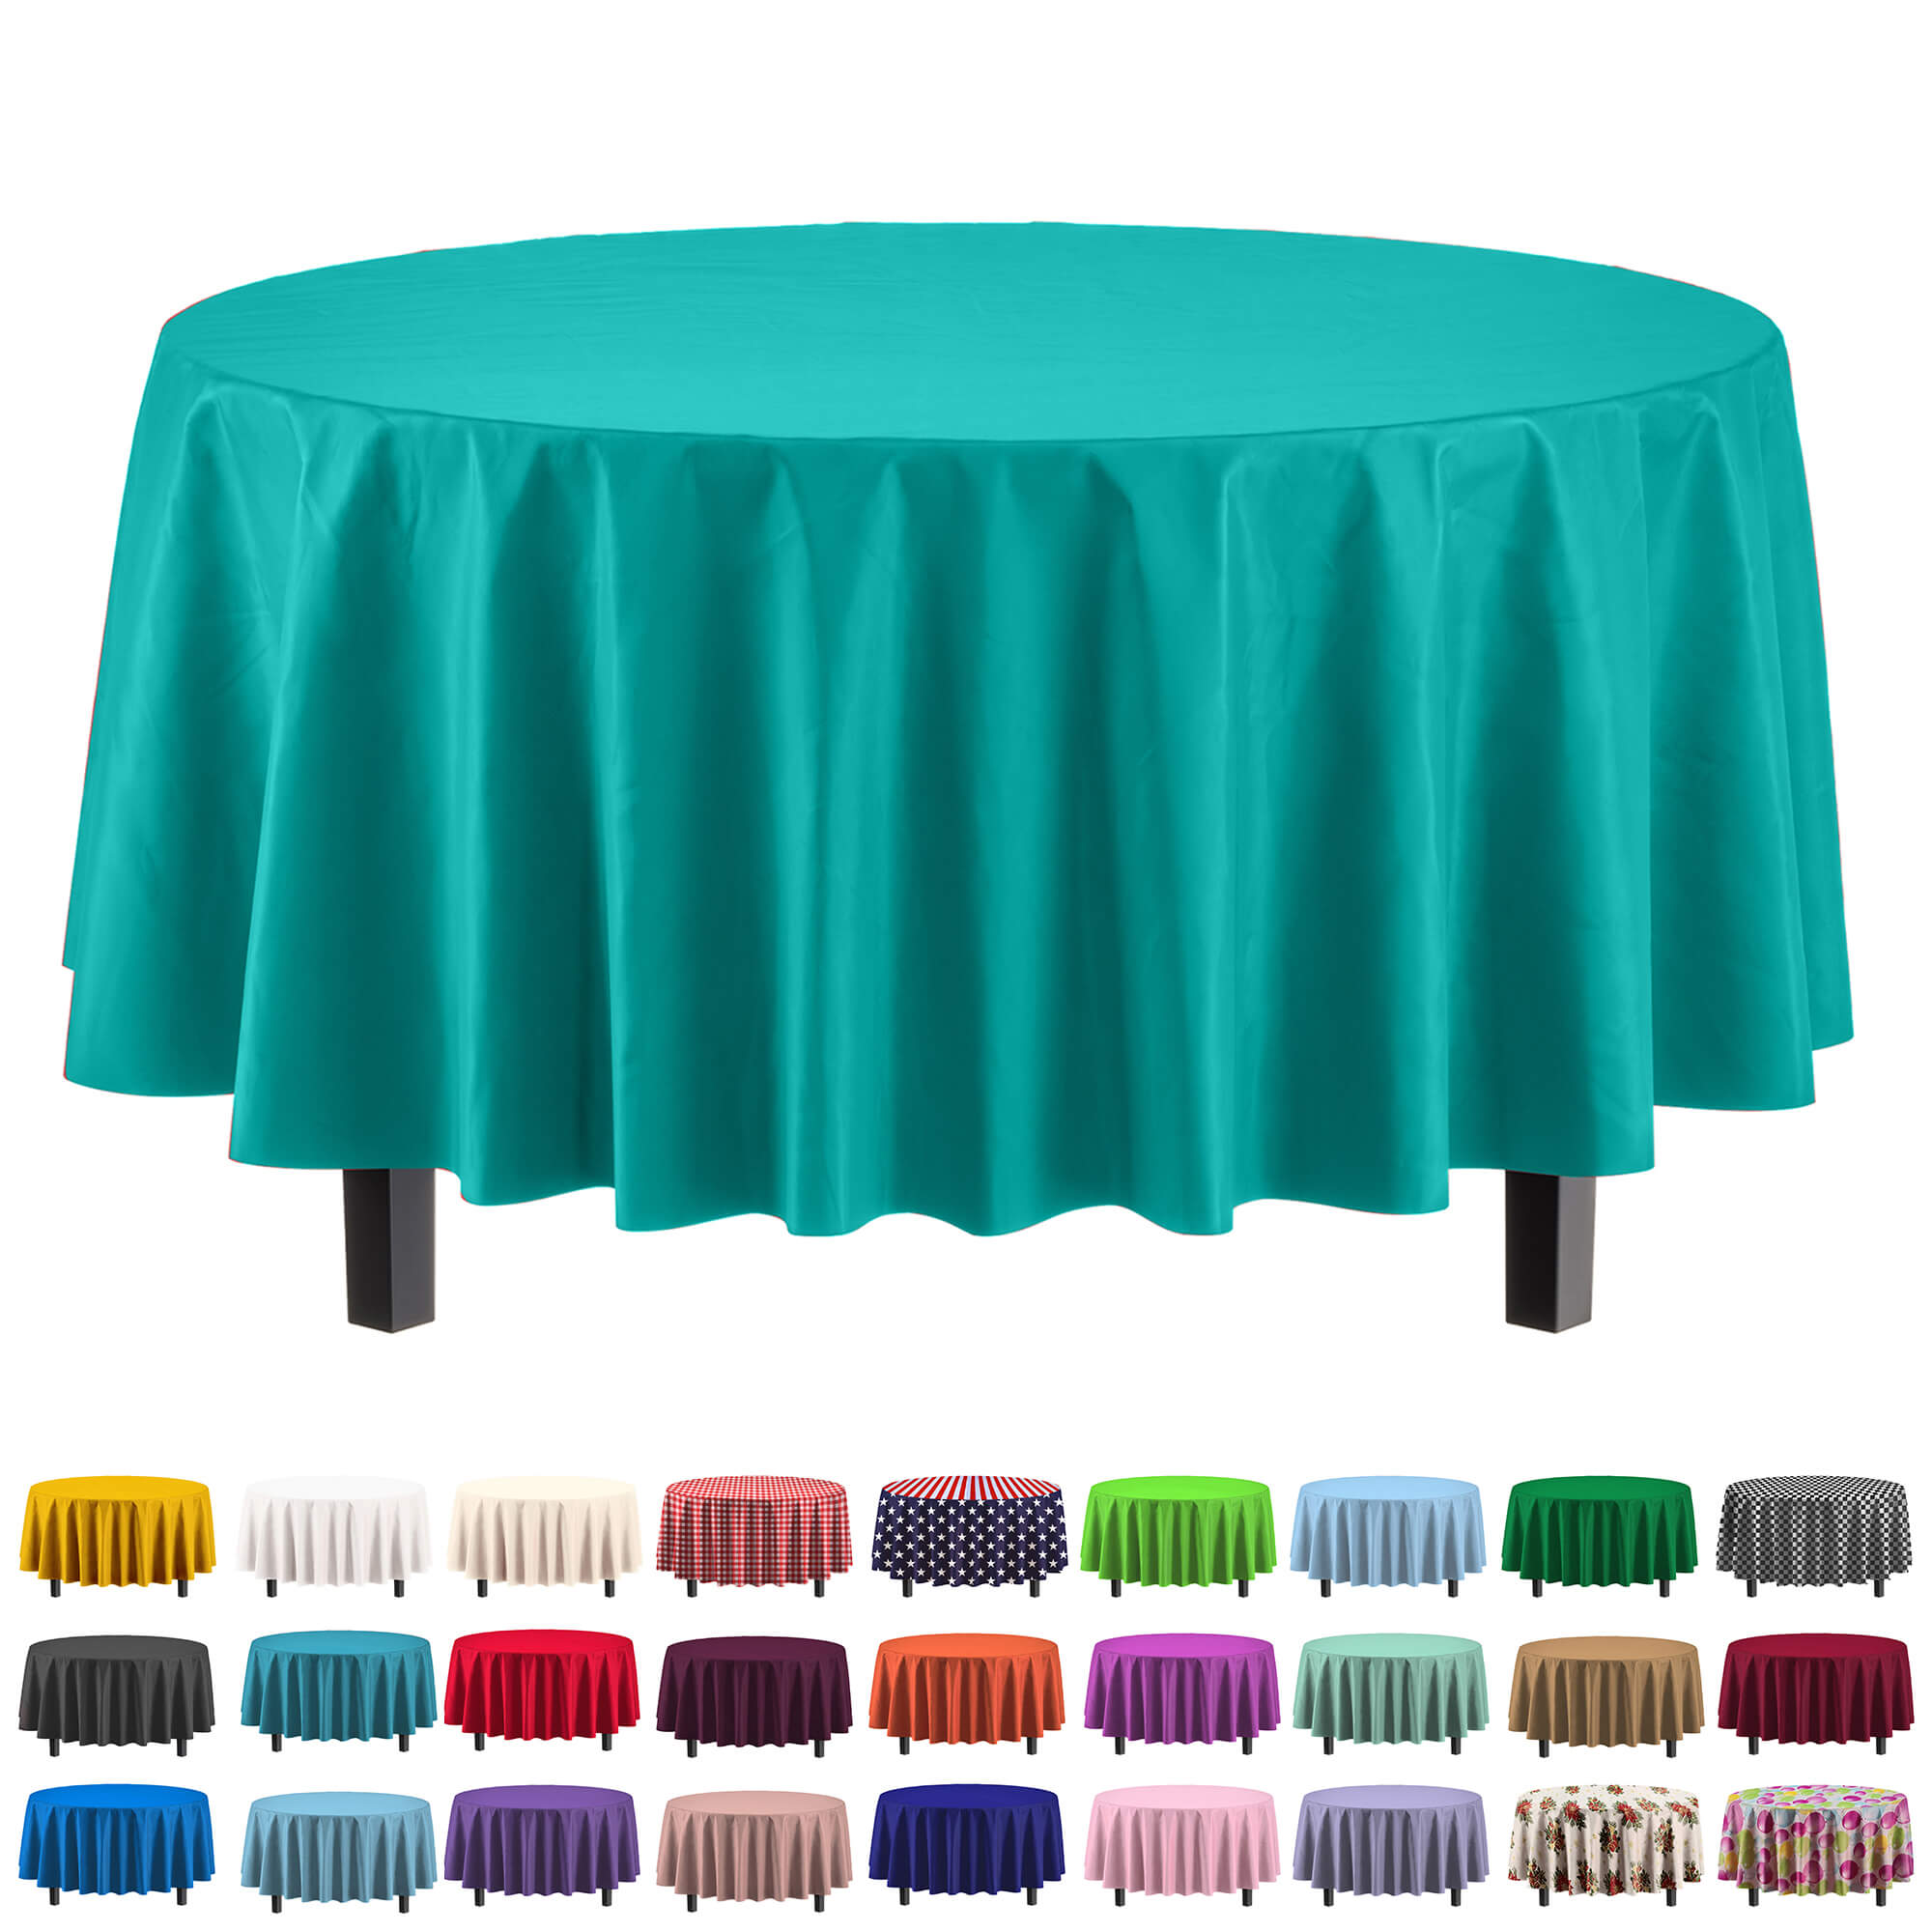 Round Teal Table Cover